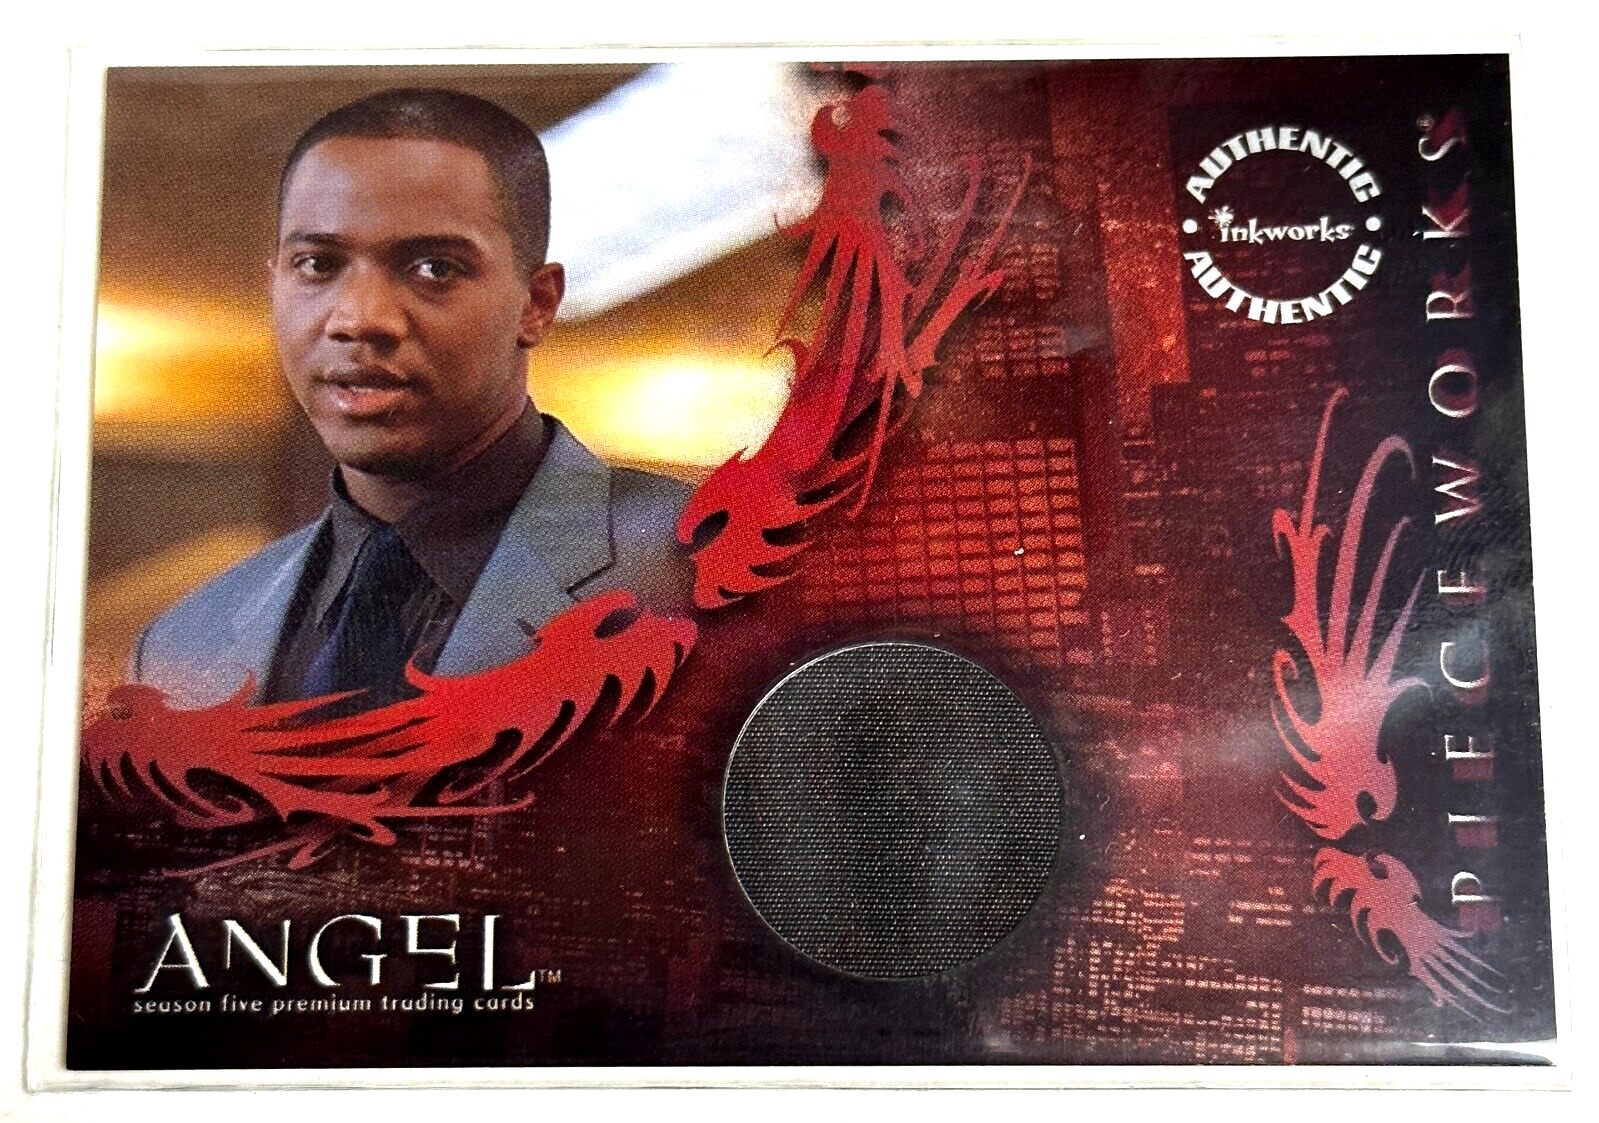 2004 Angel Season 5 Costume Card Featuring Material Worn by J. August Richards